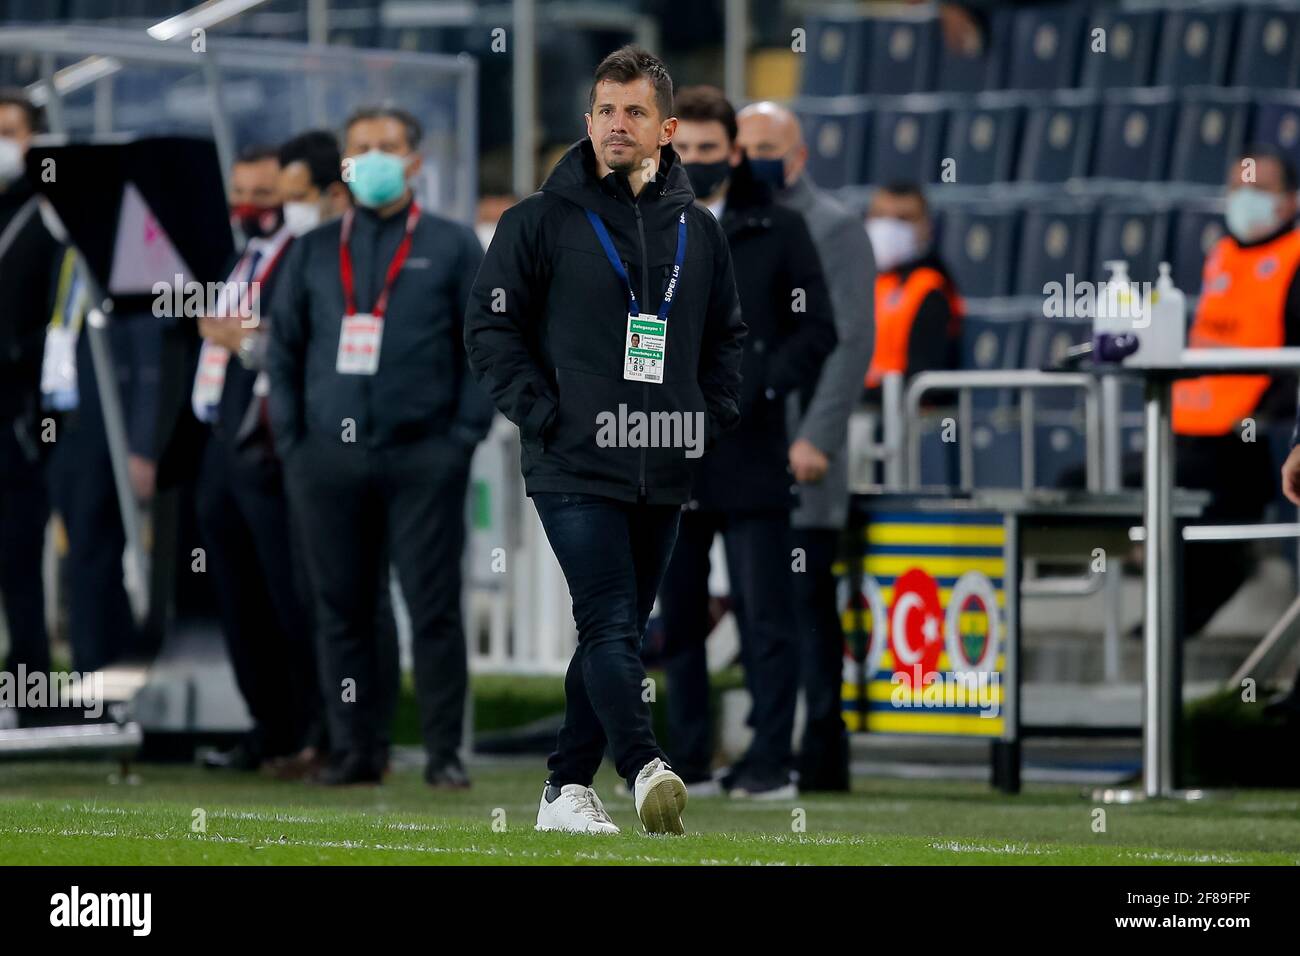 ISTANBUL, TURKEY - APRIL 12:  during the Super Lig match between Fenerbahce SK and Gaziantep FK at Sukru Saracoglu Stadium on April 12, 2021 in Istanb Stock Photo